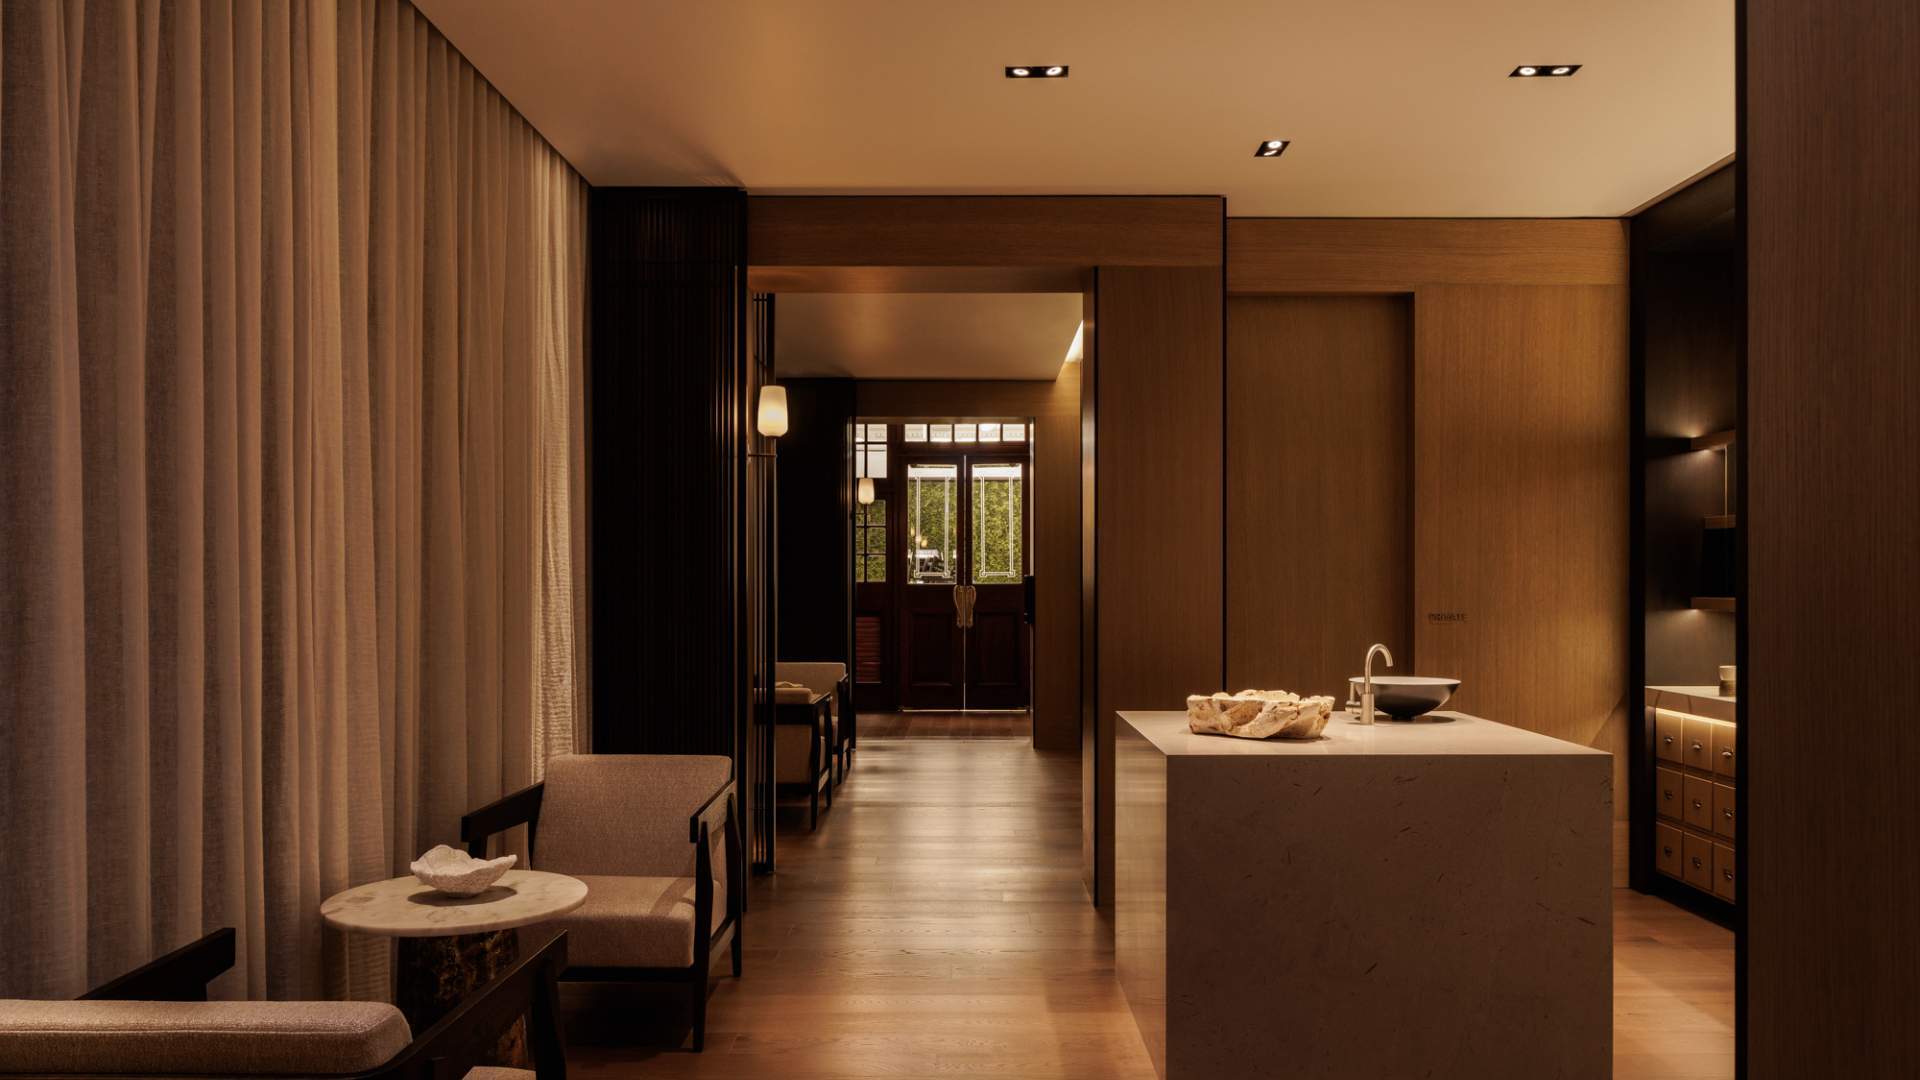 The Capella Hotel Sydney's luxurious Auriga Spa foyer with timber floorboards and warm muted lighting.